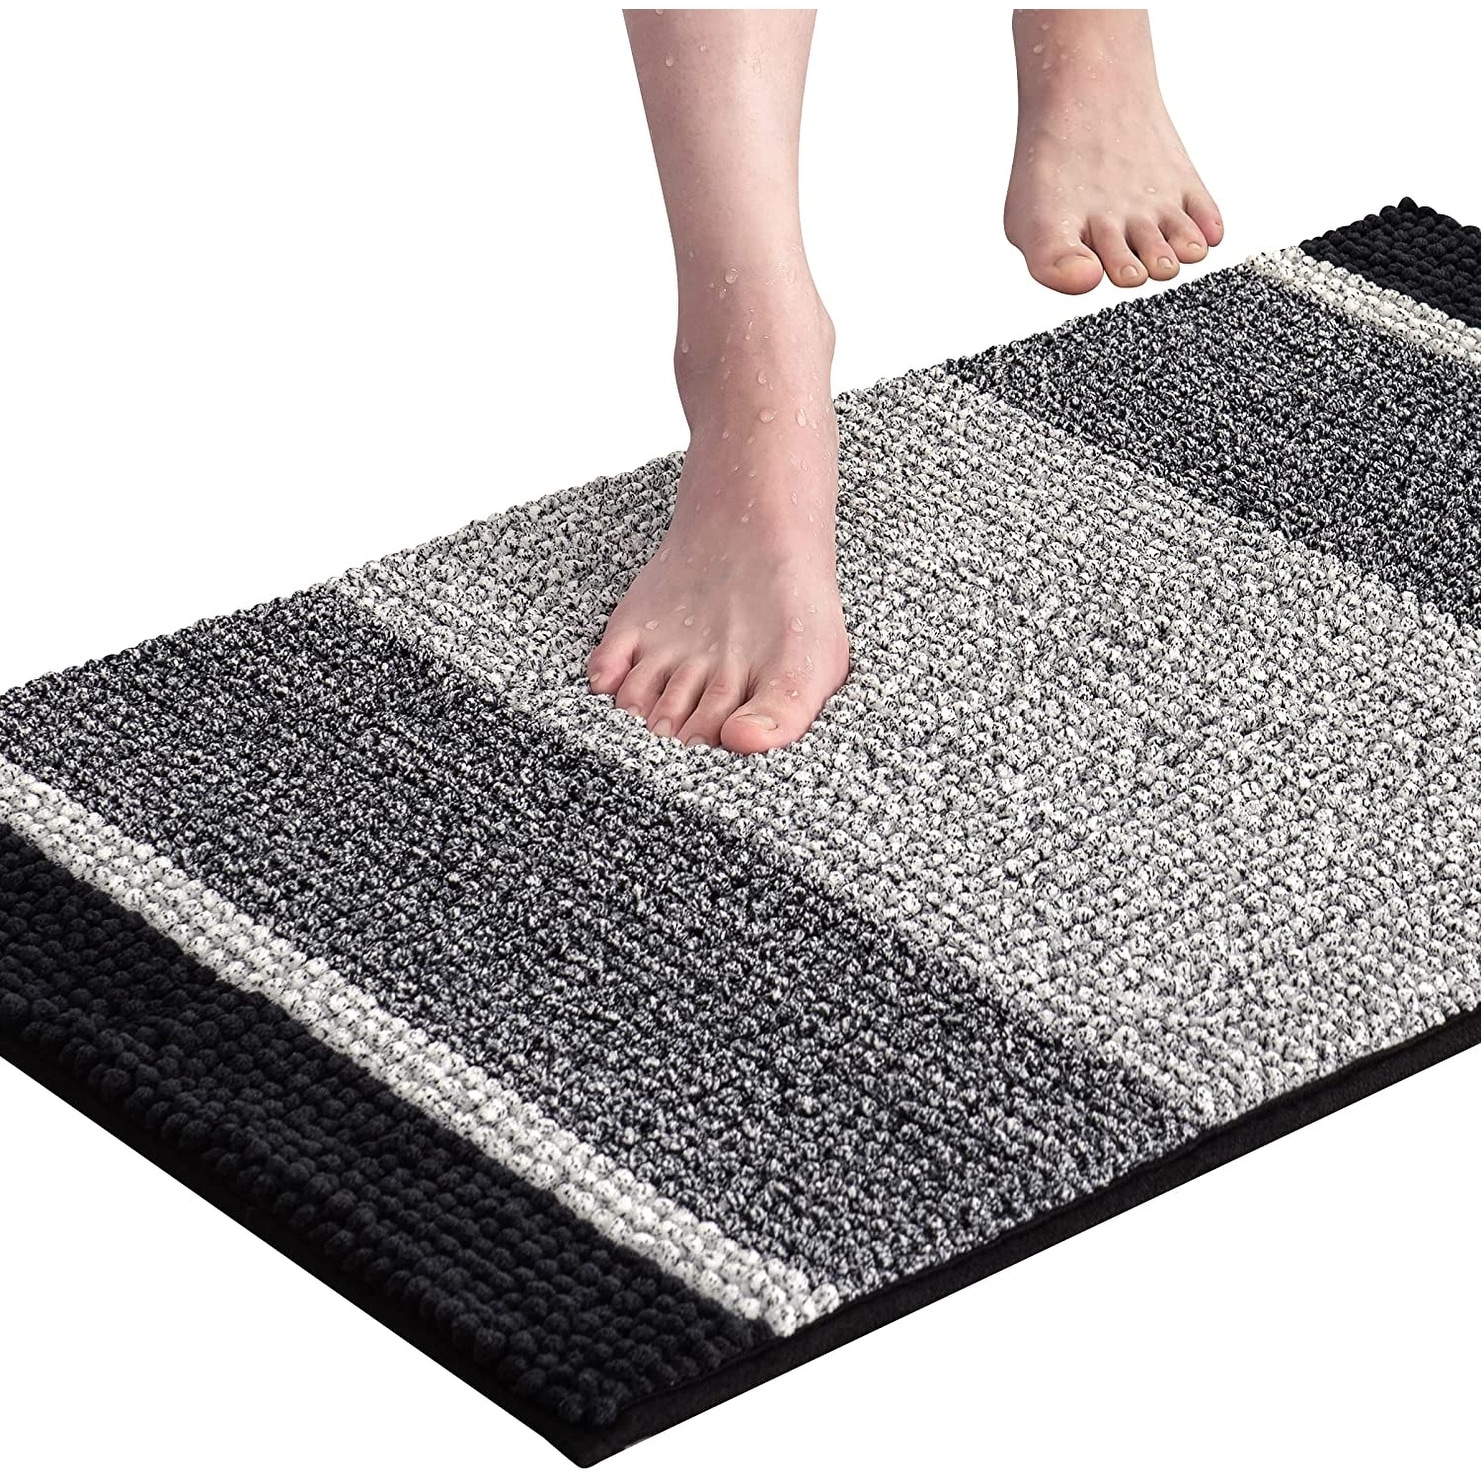 https://ak1.ostkcdn.com/images/products/is/images/direct/3916cc5e4dd5f335ab8f74c4934d7df054697602/Subrtex-Rugs-Chenille-Gradient-Stripe-Pattern-Soft-Plush-Bath-Rug-Shower-Water-Absorbent-Mat.jpg